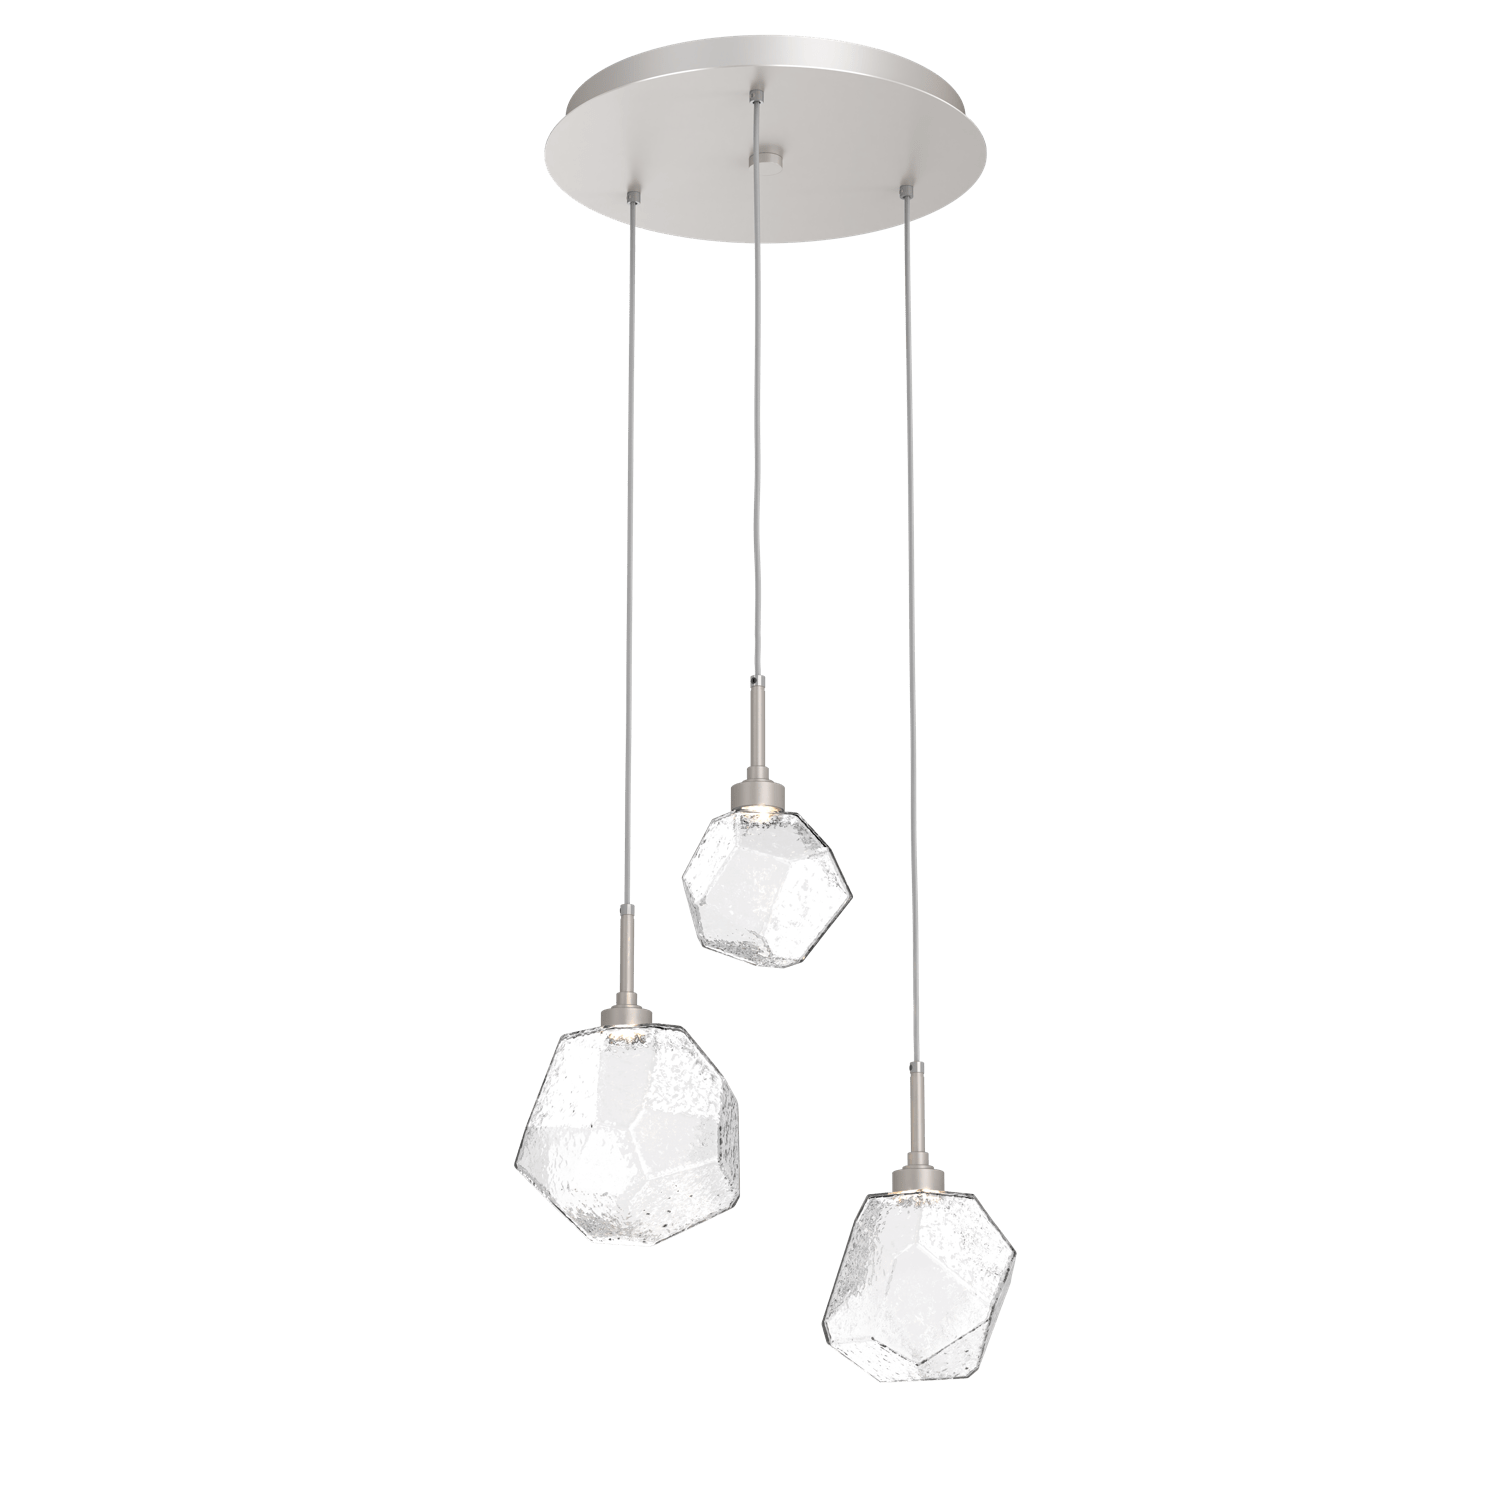 CHB0039-03-BS-C-Hammerton-Studio-Gem-3-light-round-pendant-chandelier-with-metallic-beige-silver-finish-and-clear-blown-glass-shades-and-LED-lamping